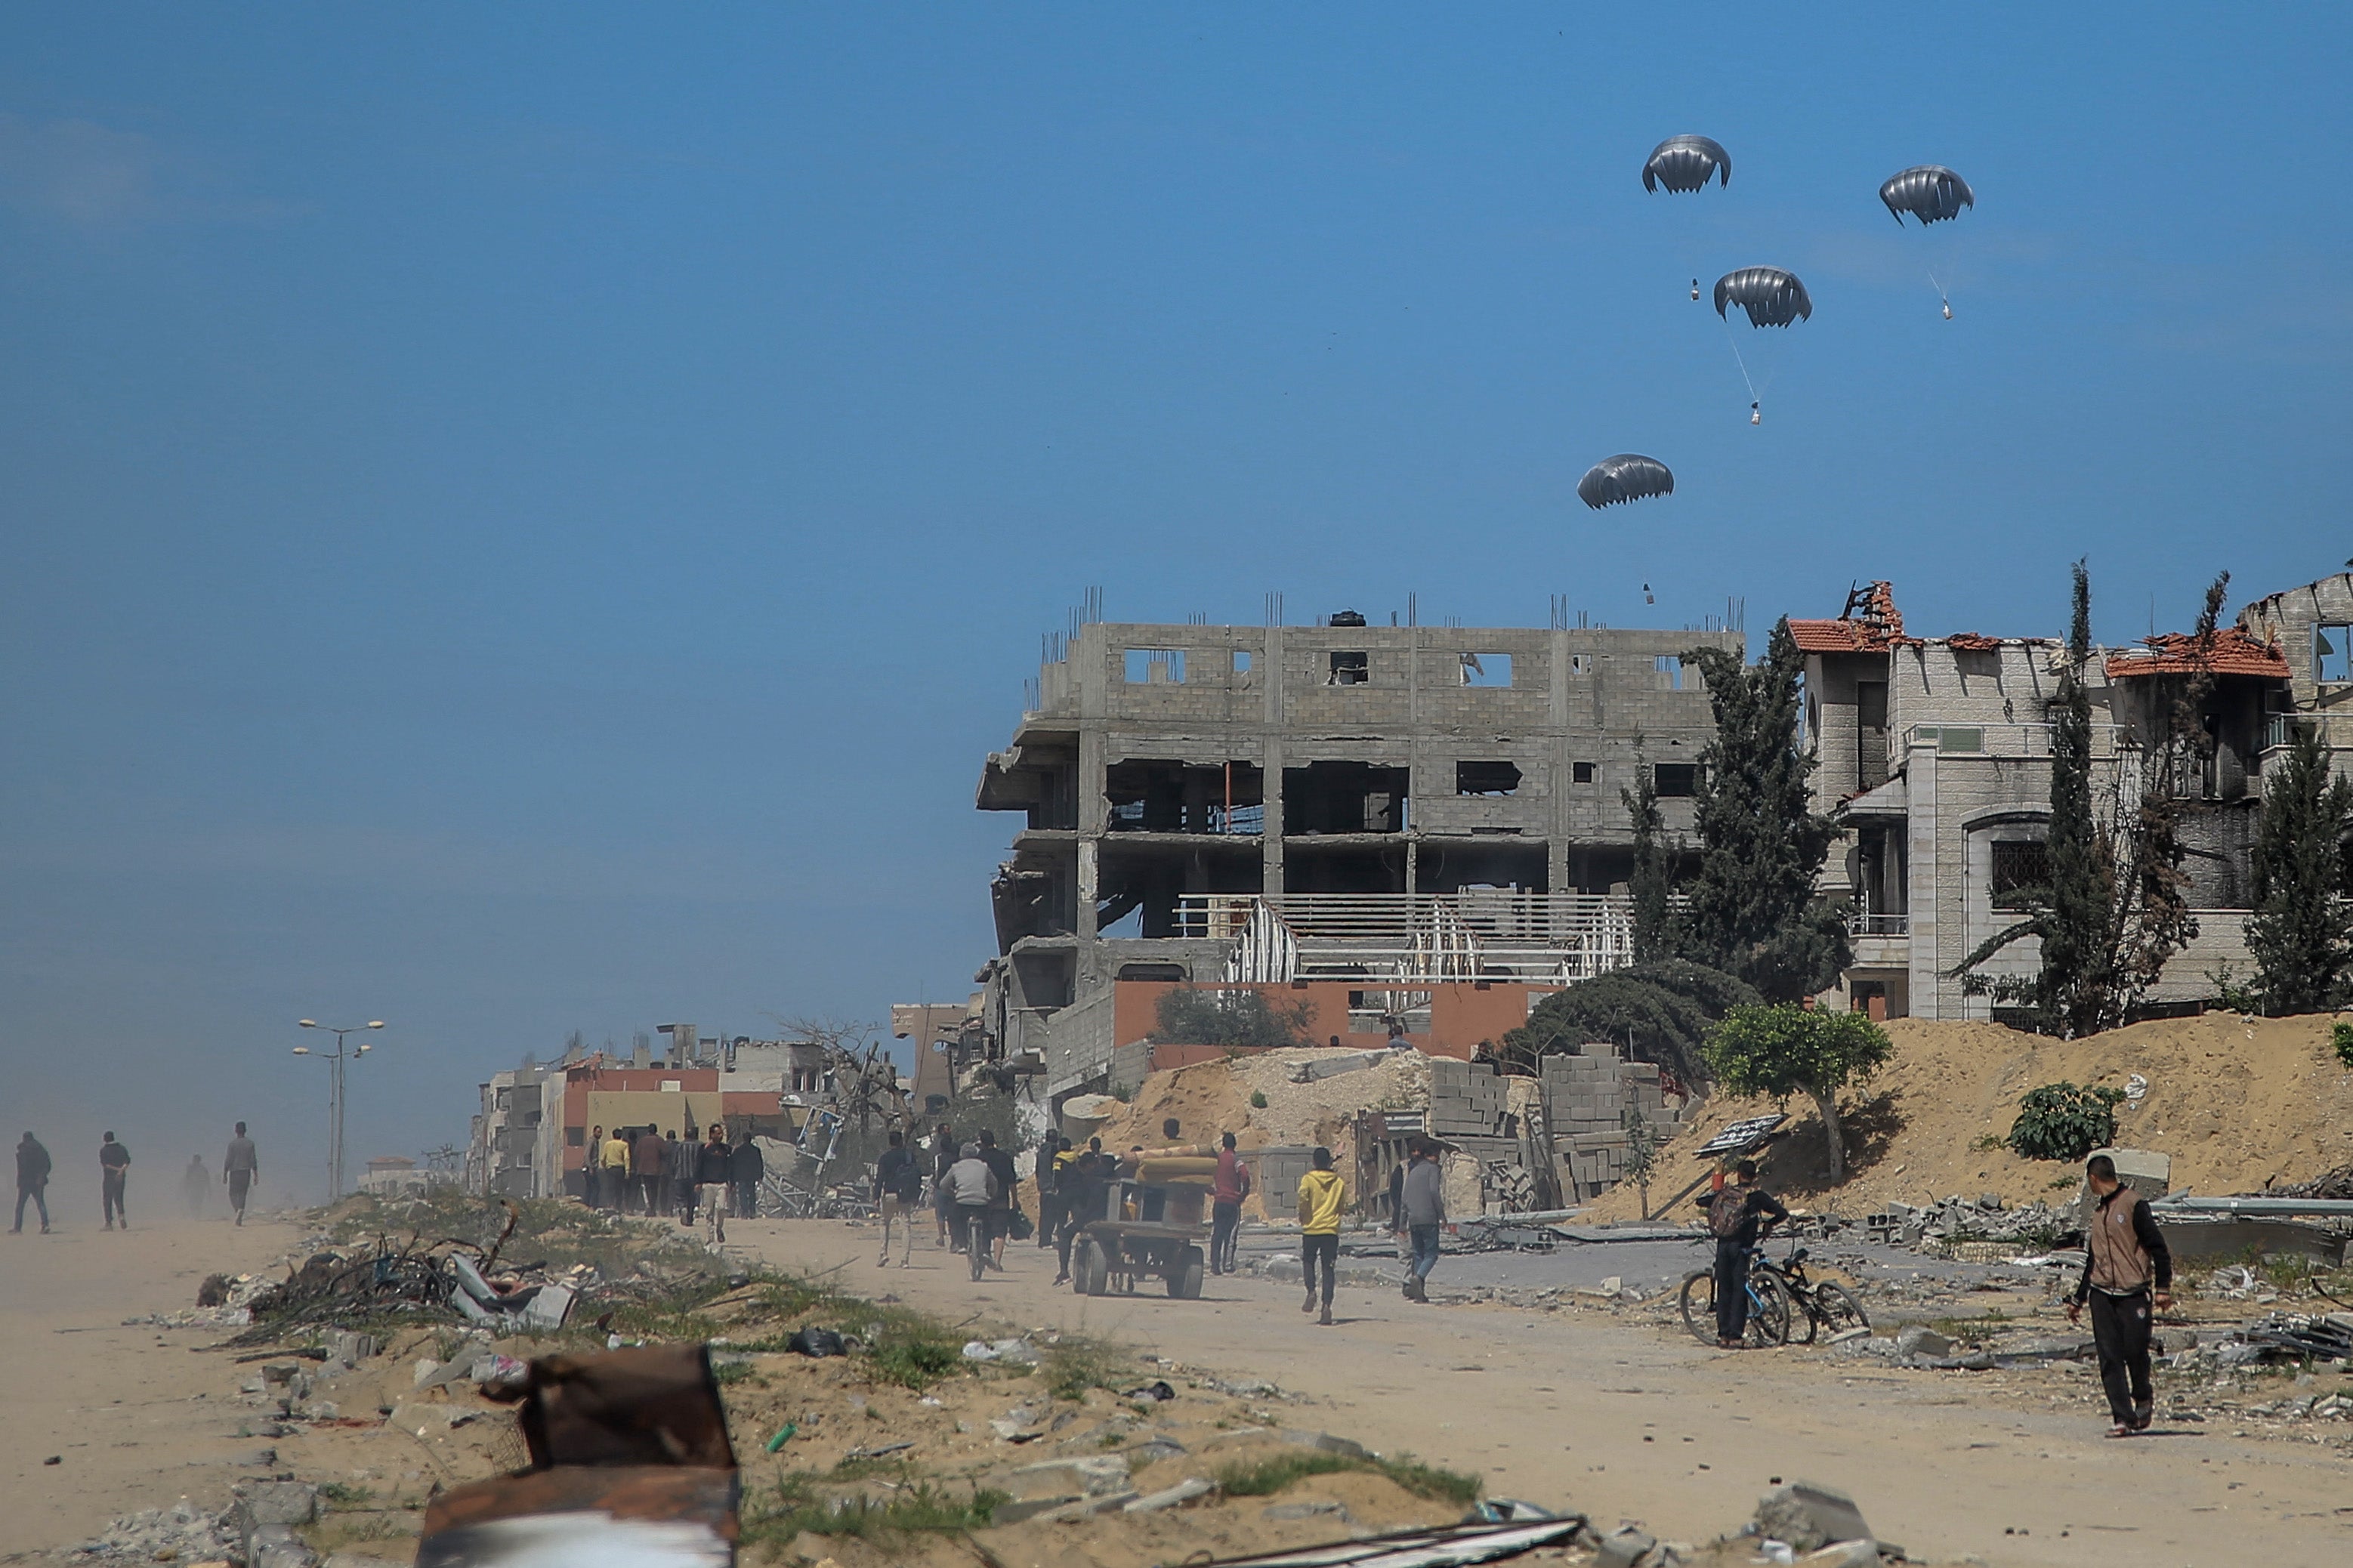 Humanitarian aid parcels attached to parachutes are airdropped from military aircraft over Gazaon 21 March